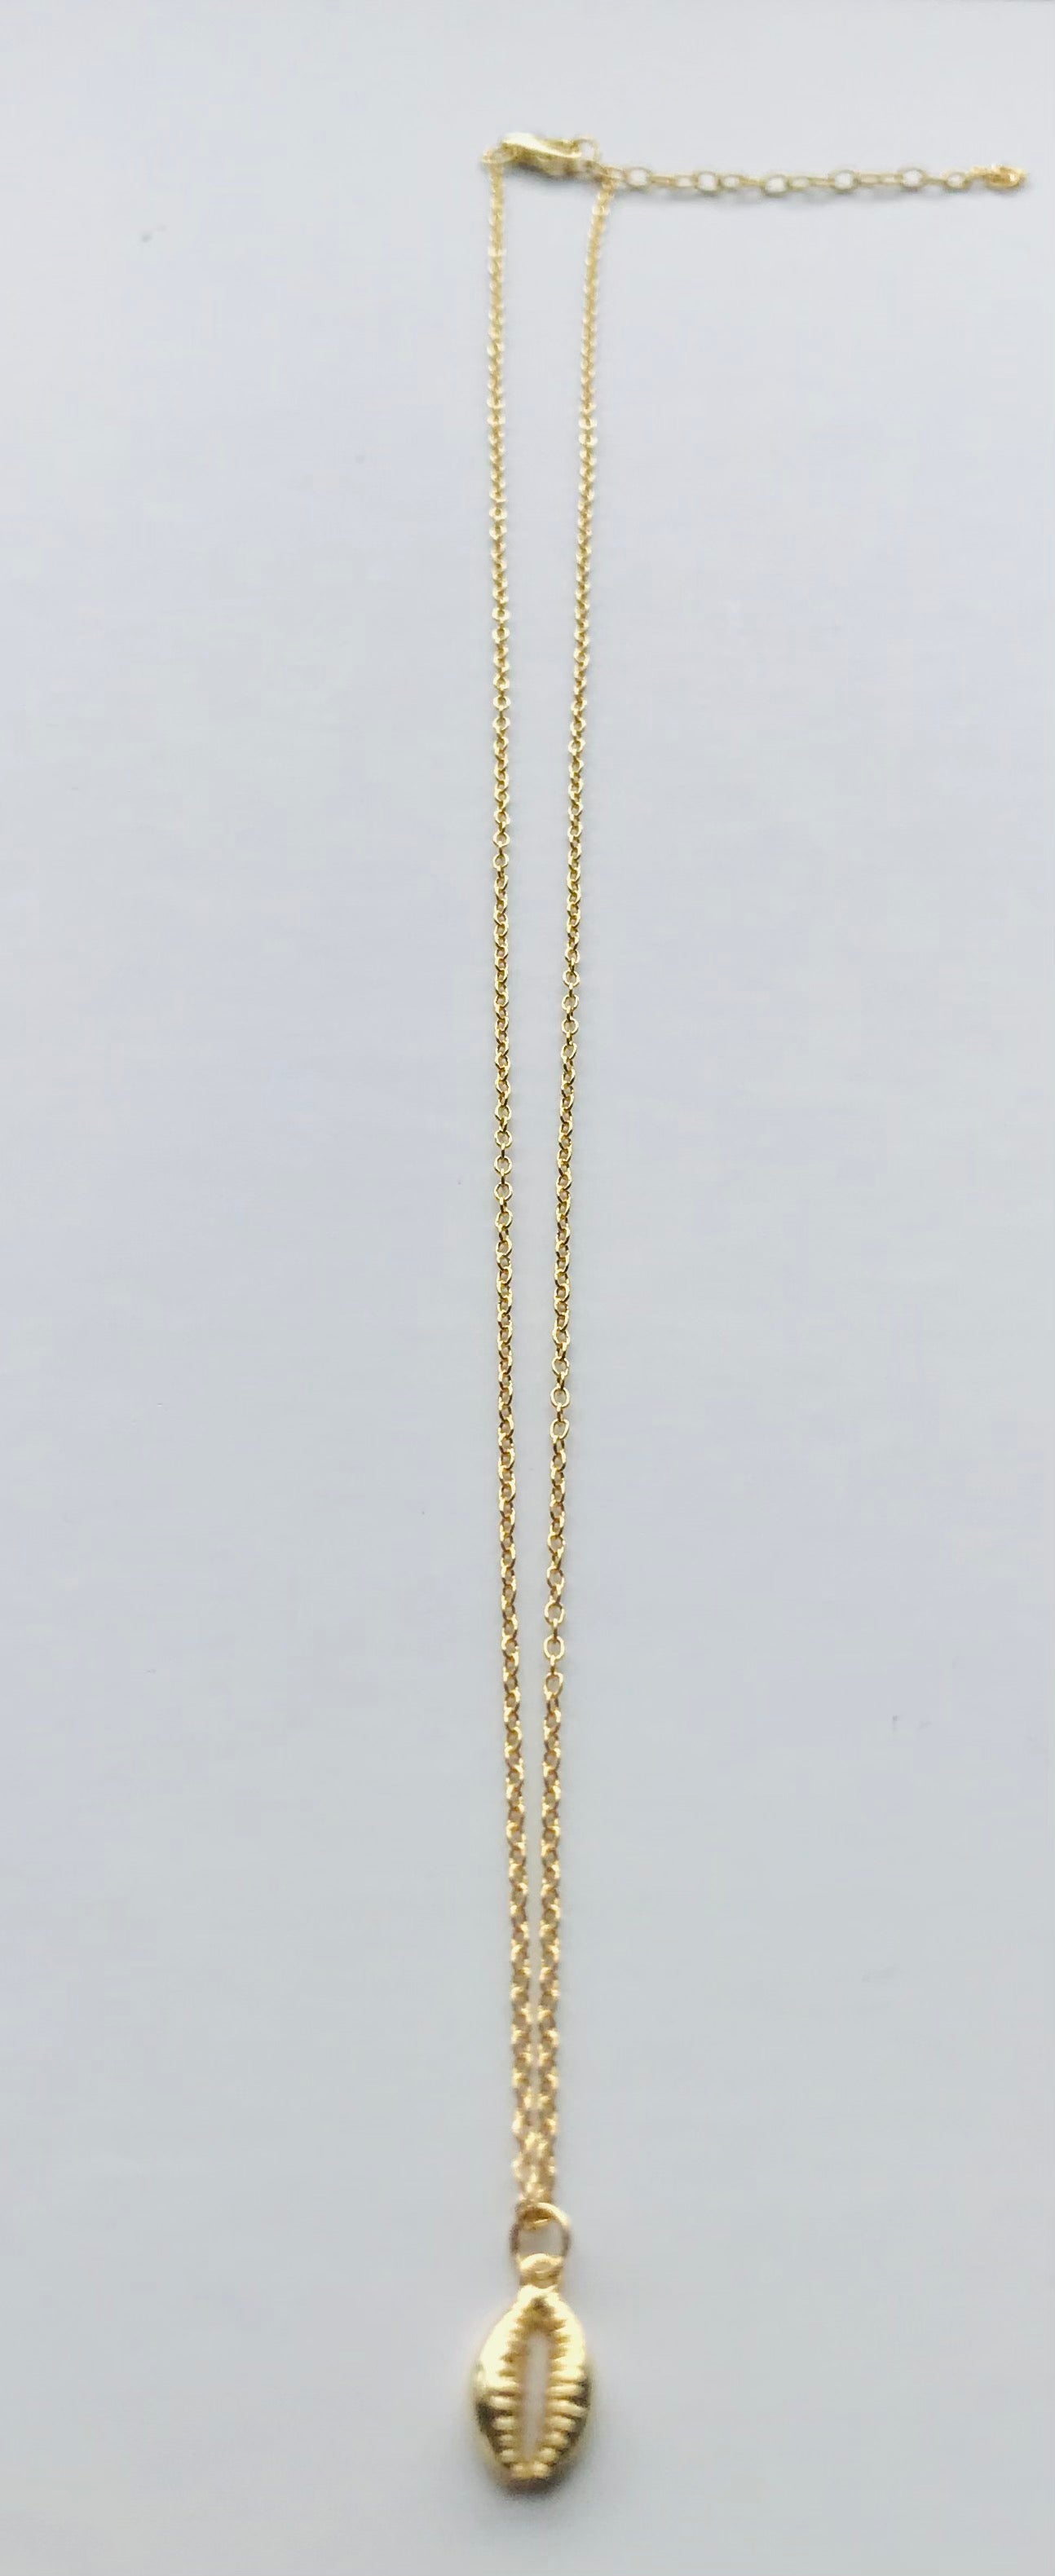 SAM&CEL goldplated necklace with little shell